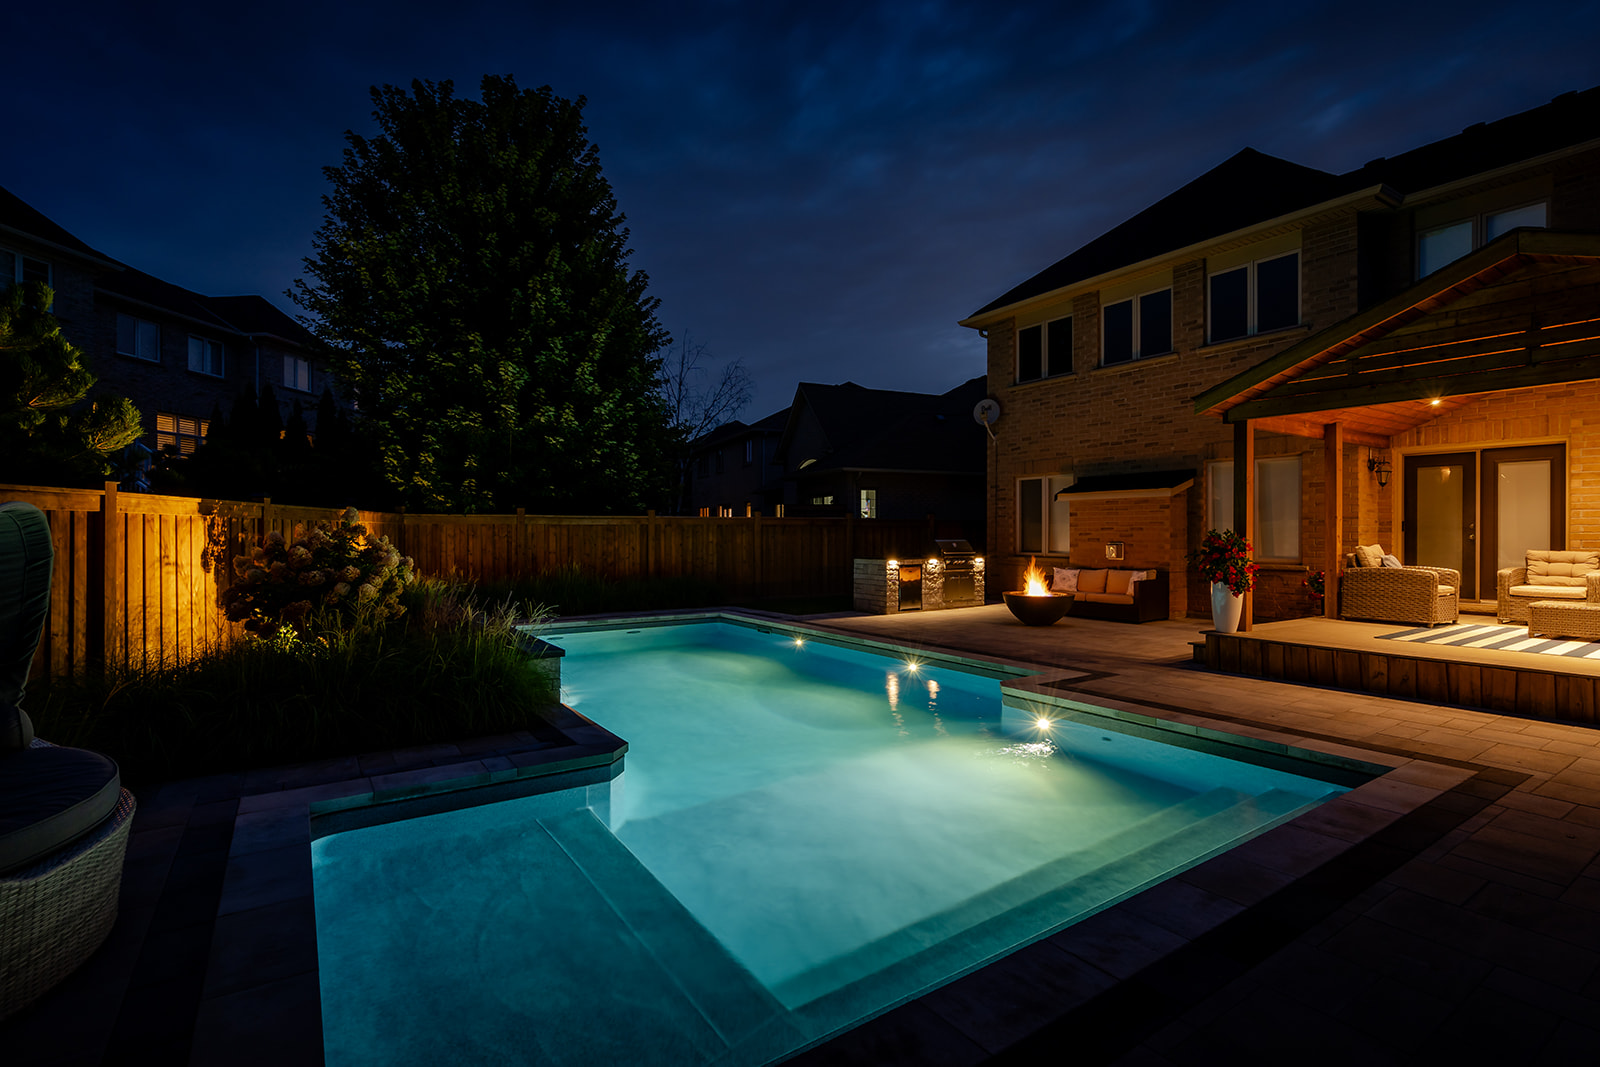 An inground pool with a fireplace on the far side of the backyard with lights on.